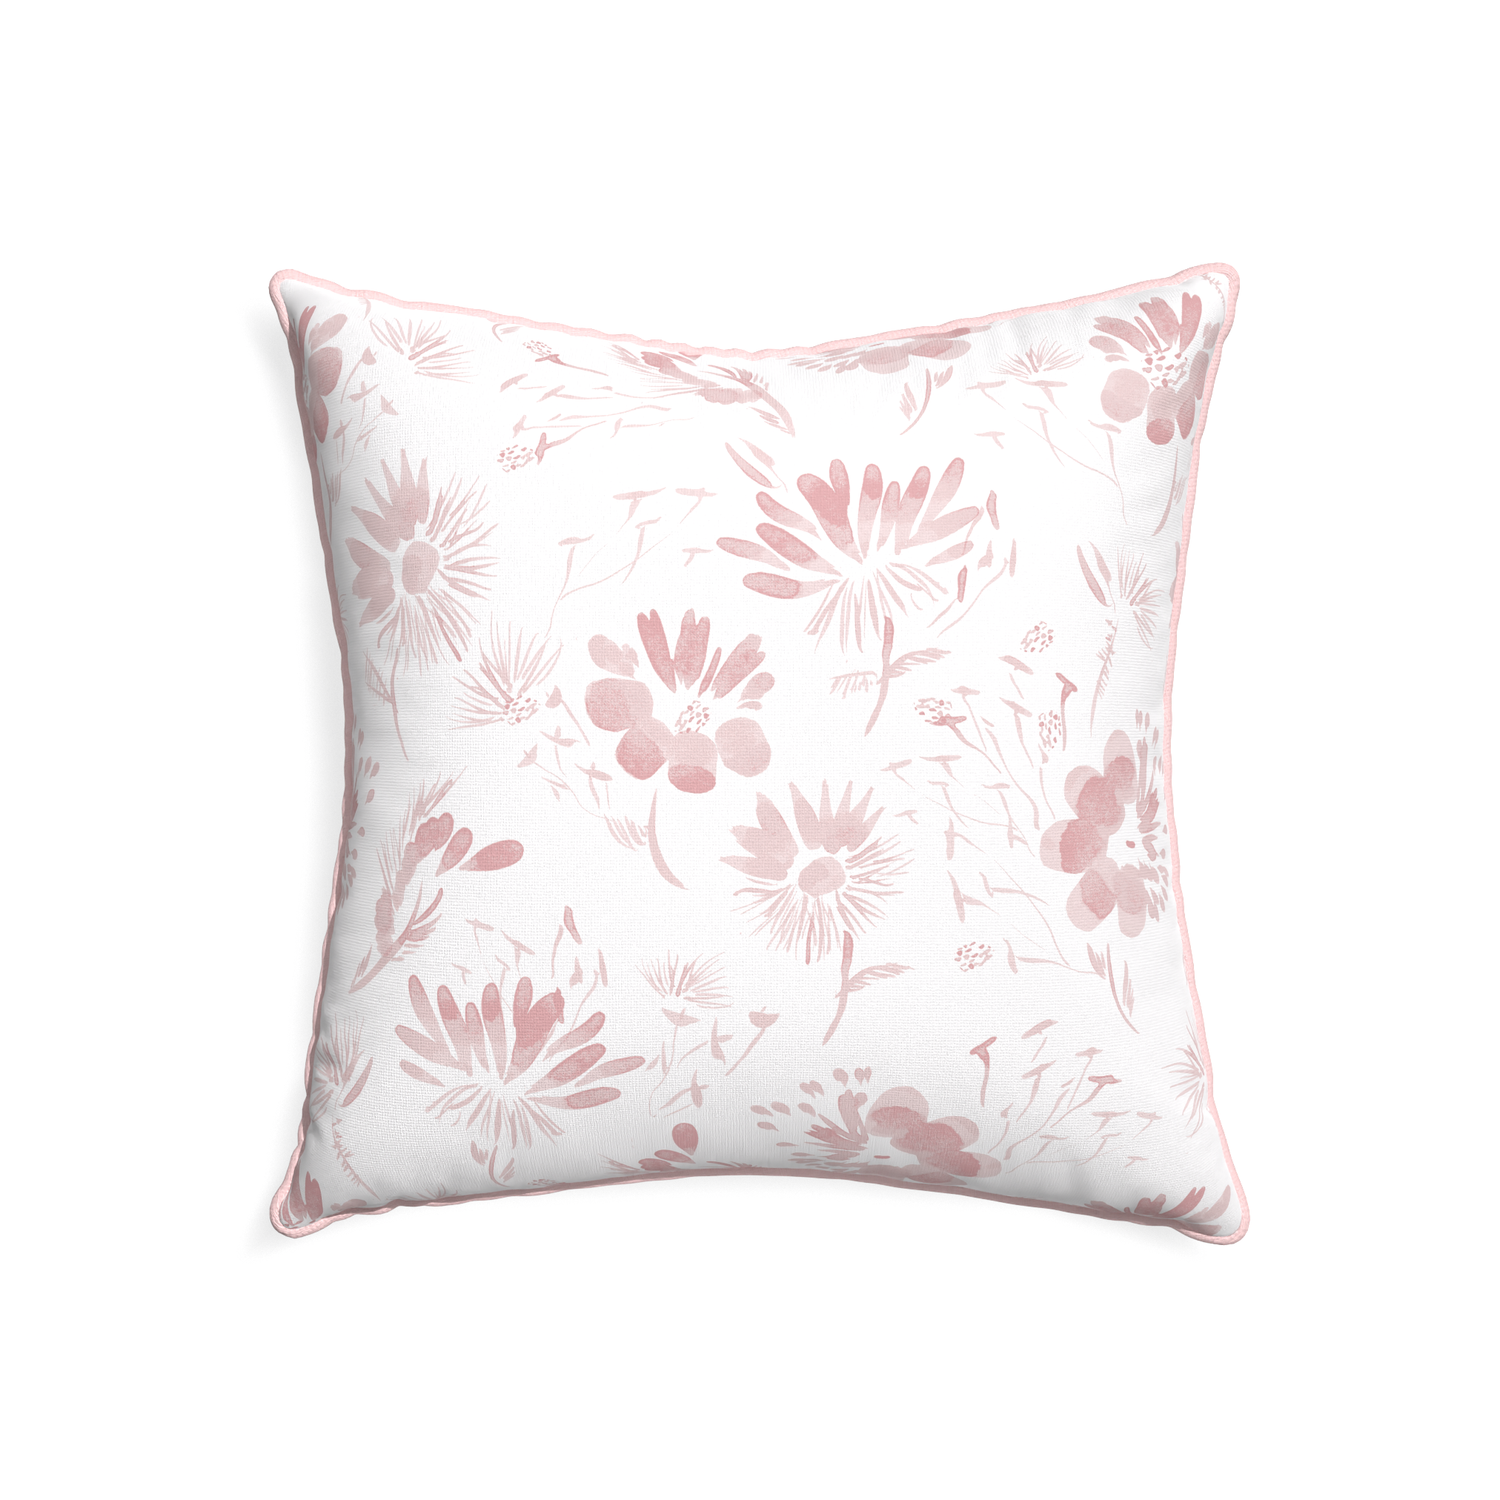 22-square blake custom pink floralpillow with petal piping on white background